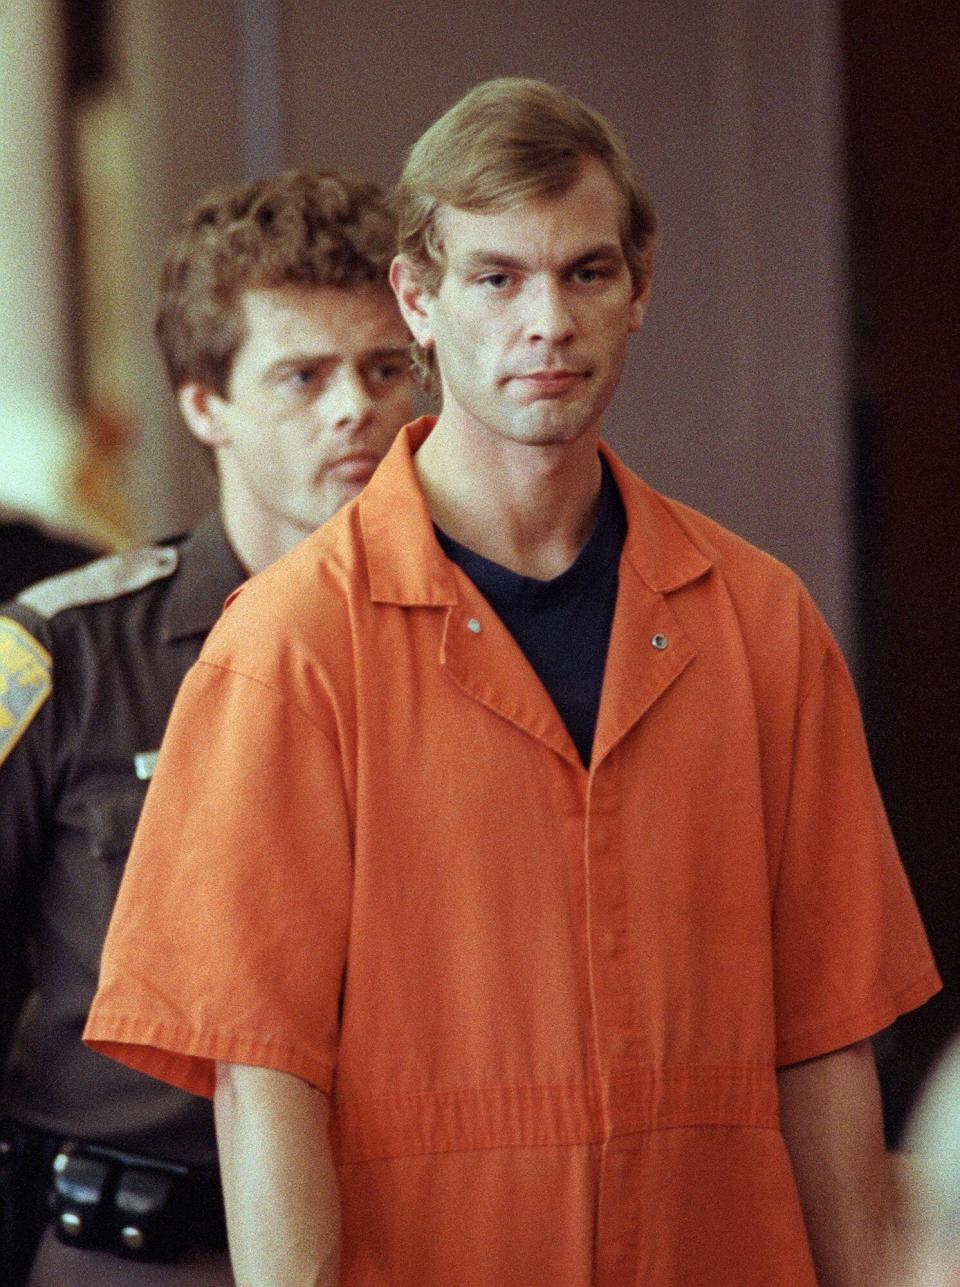 Suspected serial killer Jeffrey L. Dahmer enters the courtroom of judge Jeffrey A. Wagner 06 August 1991. Dahmer has been charged with eight additional counts of first-degree murder, bringing the number of homicides he is charged with to 12. The judge increased Dahmer's bail to five million dollars. He was sentenced to fifteen consecutive life terms or a total of 957 years in prison. Dahmer was killed by a fellow prisoner, Christopher Scarver, 28 November 1994 at Columbia Correctional Institution, Portage, Wisconsin.